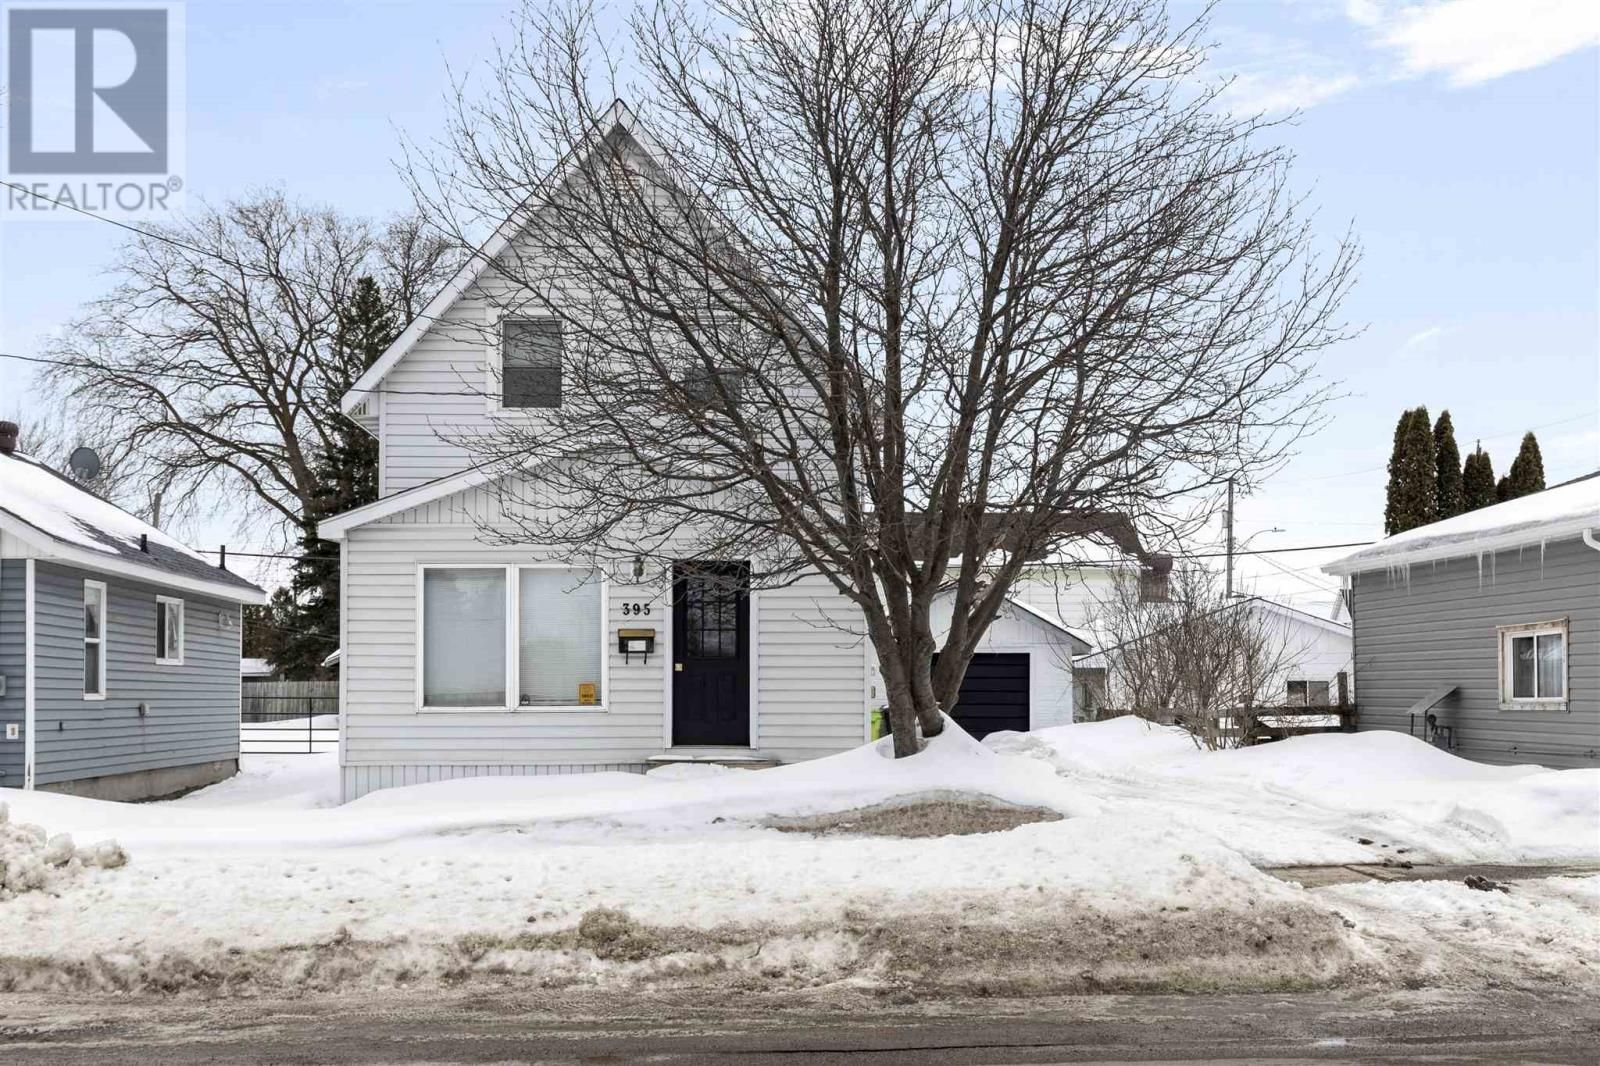 Main Photo: 395 Douglas ST in Sault Ste. Marie: House for sale : MLS®# SM230400